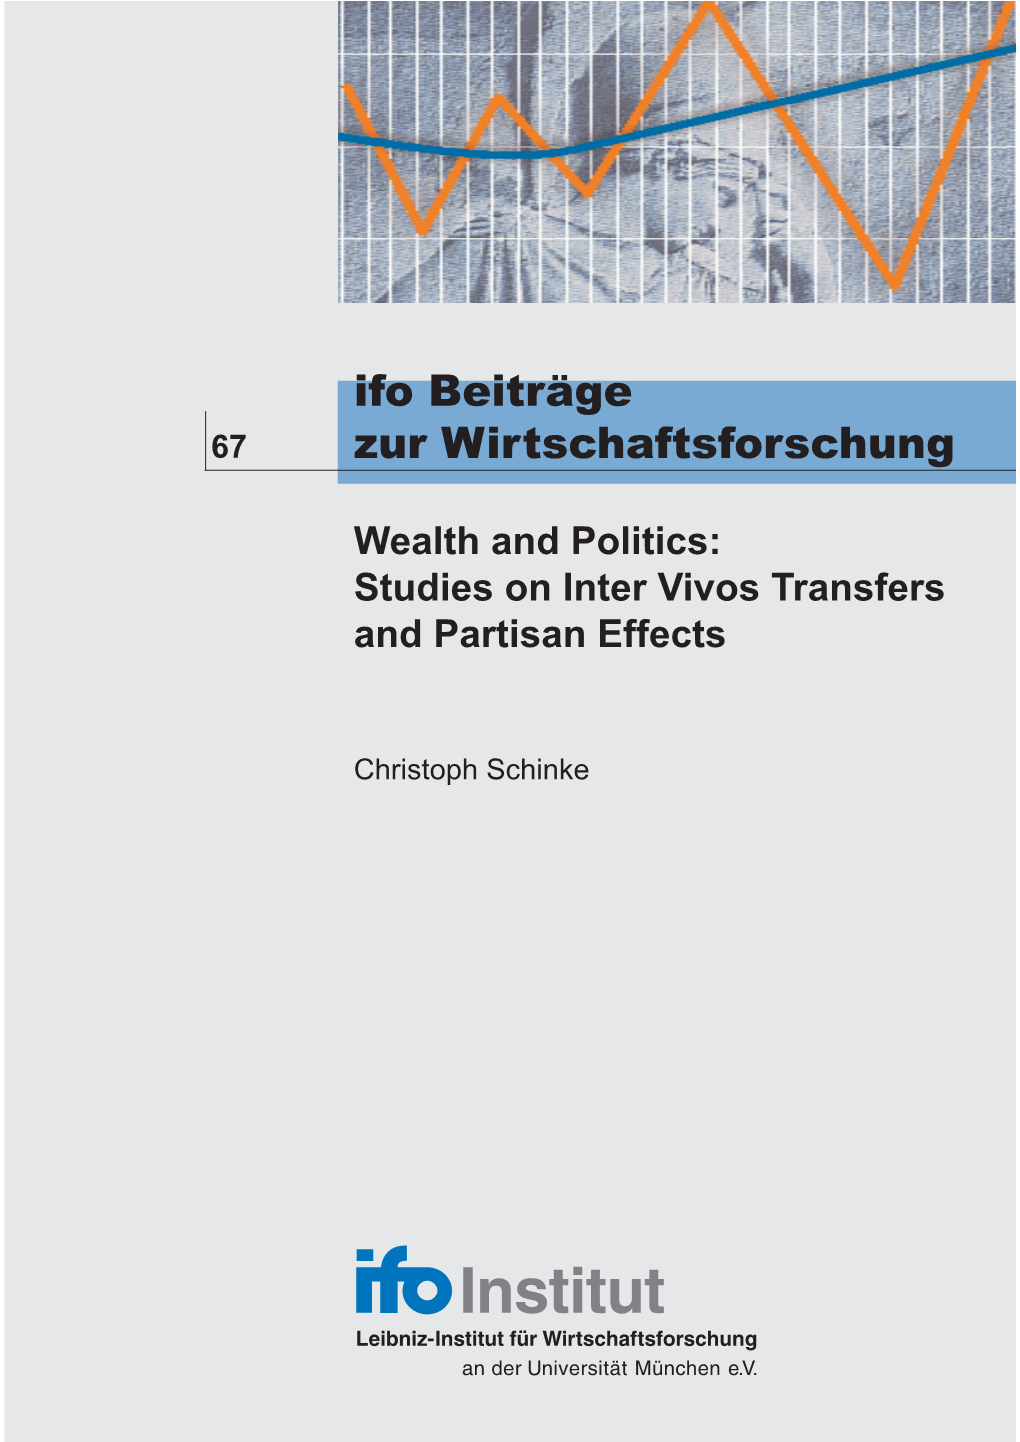 Wealth and Politics: Studies on Inter Vivos Transfers and Partisan Effects